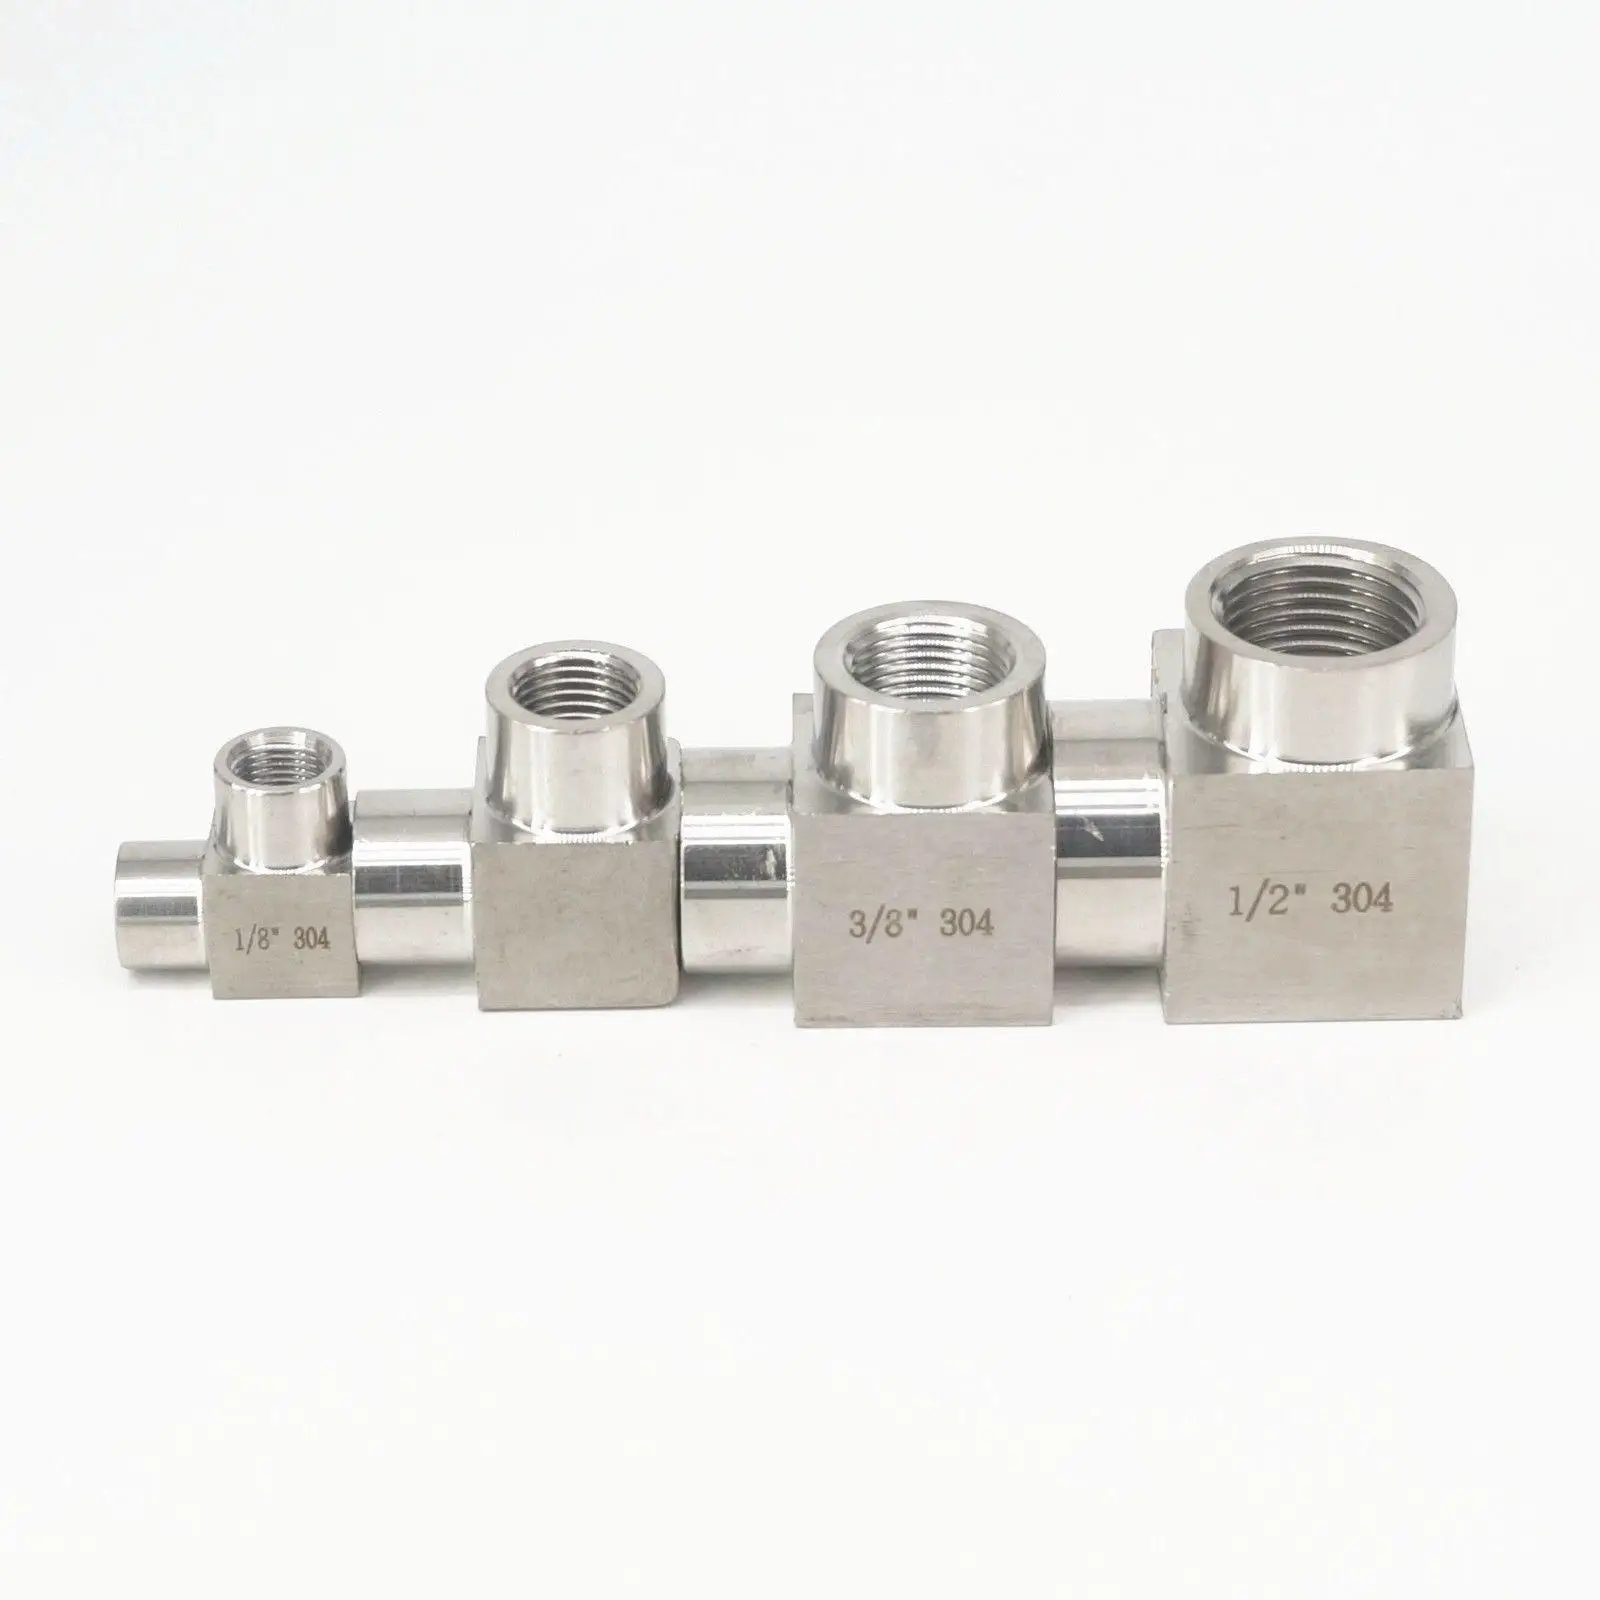 

1/8" 1/4" 3/8" 1/2" 3/4" 1" BSP Eqaul Female Elbow 90 Deg 304 Stainless Steel Pipe Fitting Adapter Connector 357 PSI